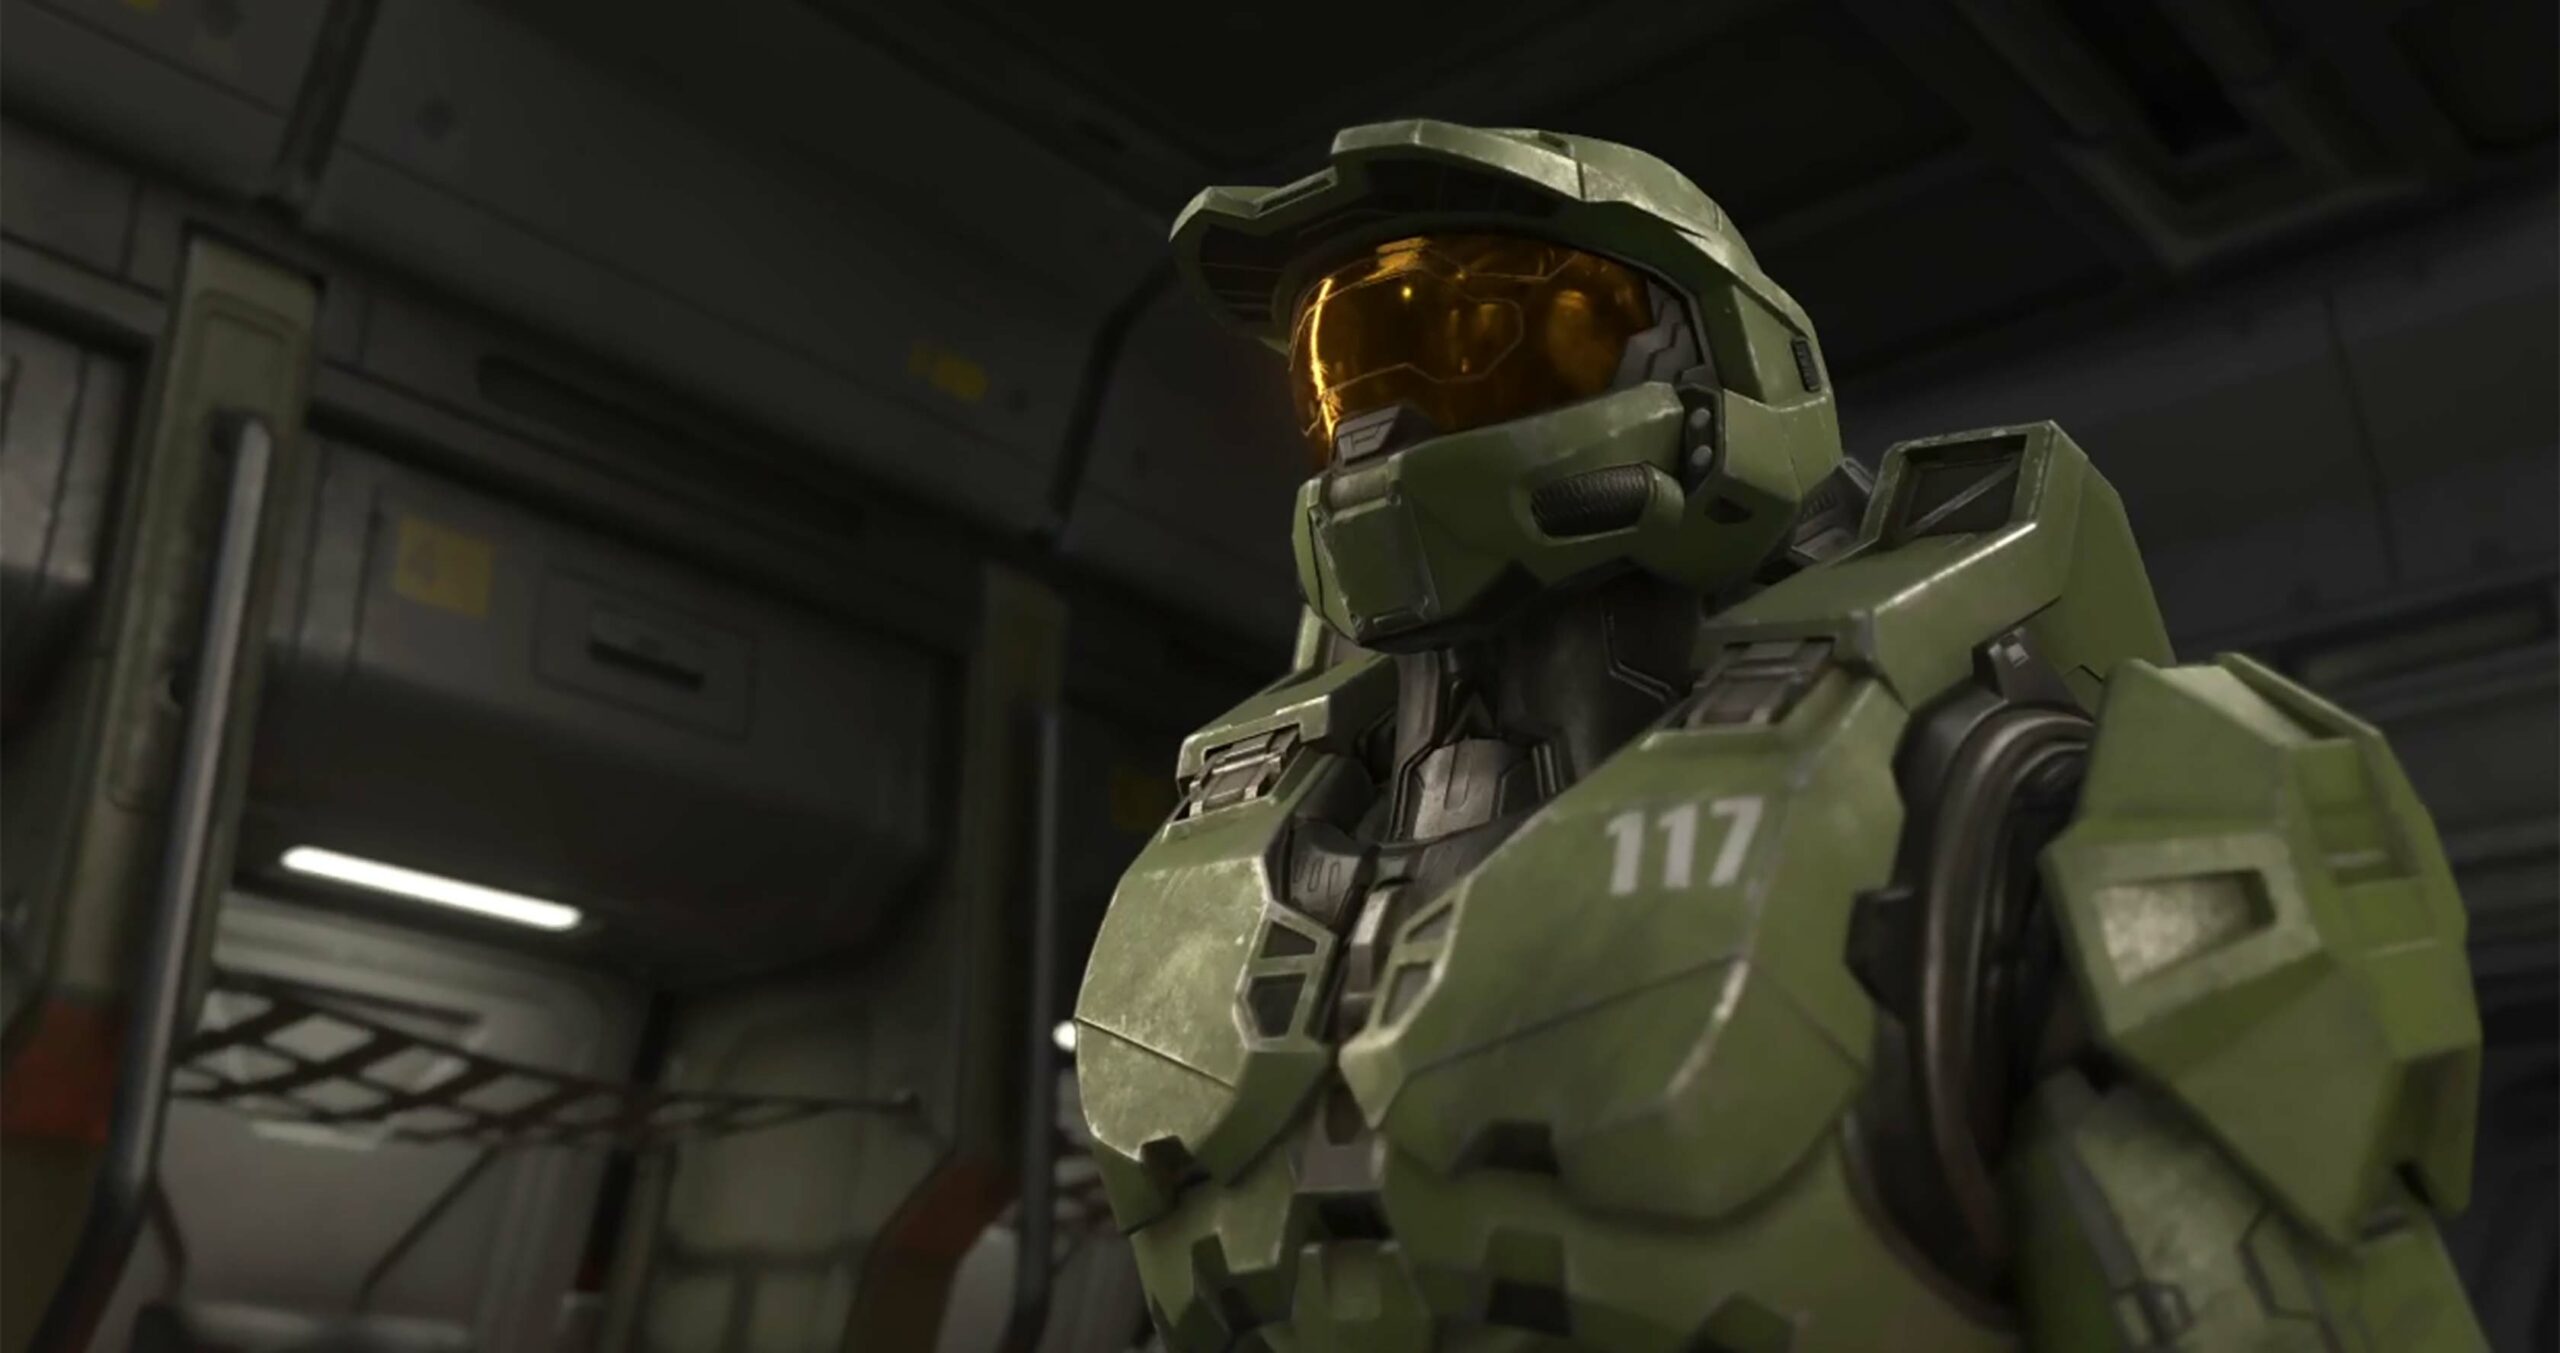 Halo Infinite fans discover workaround to play splitscreen co-op